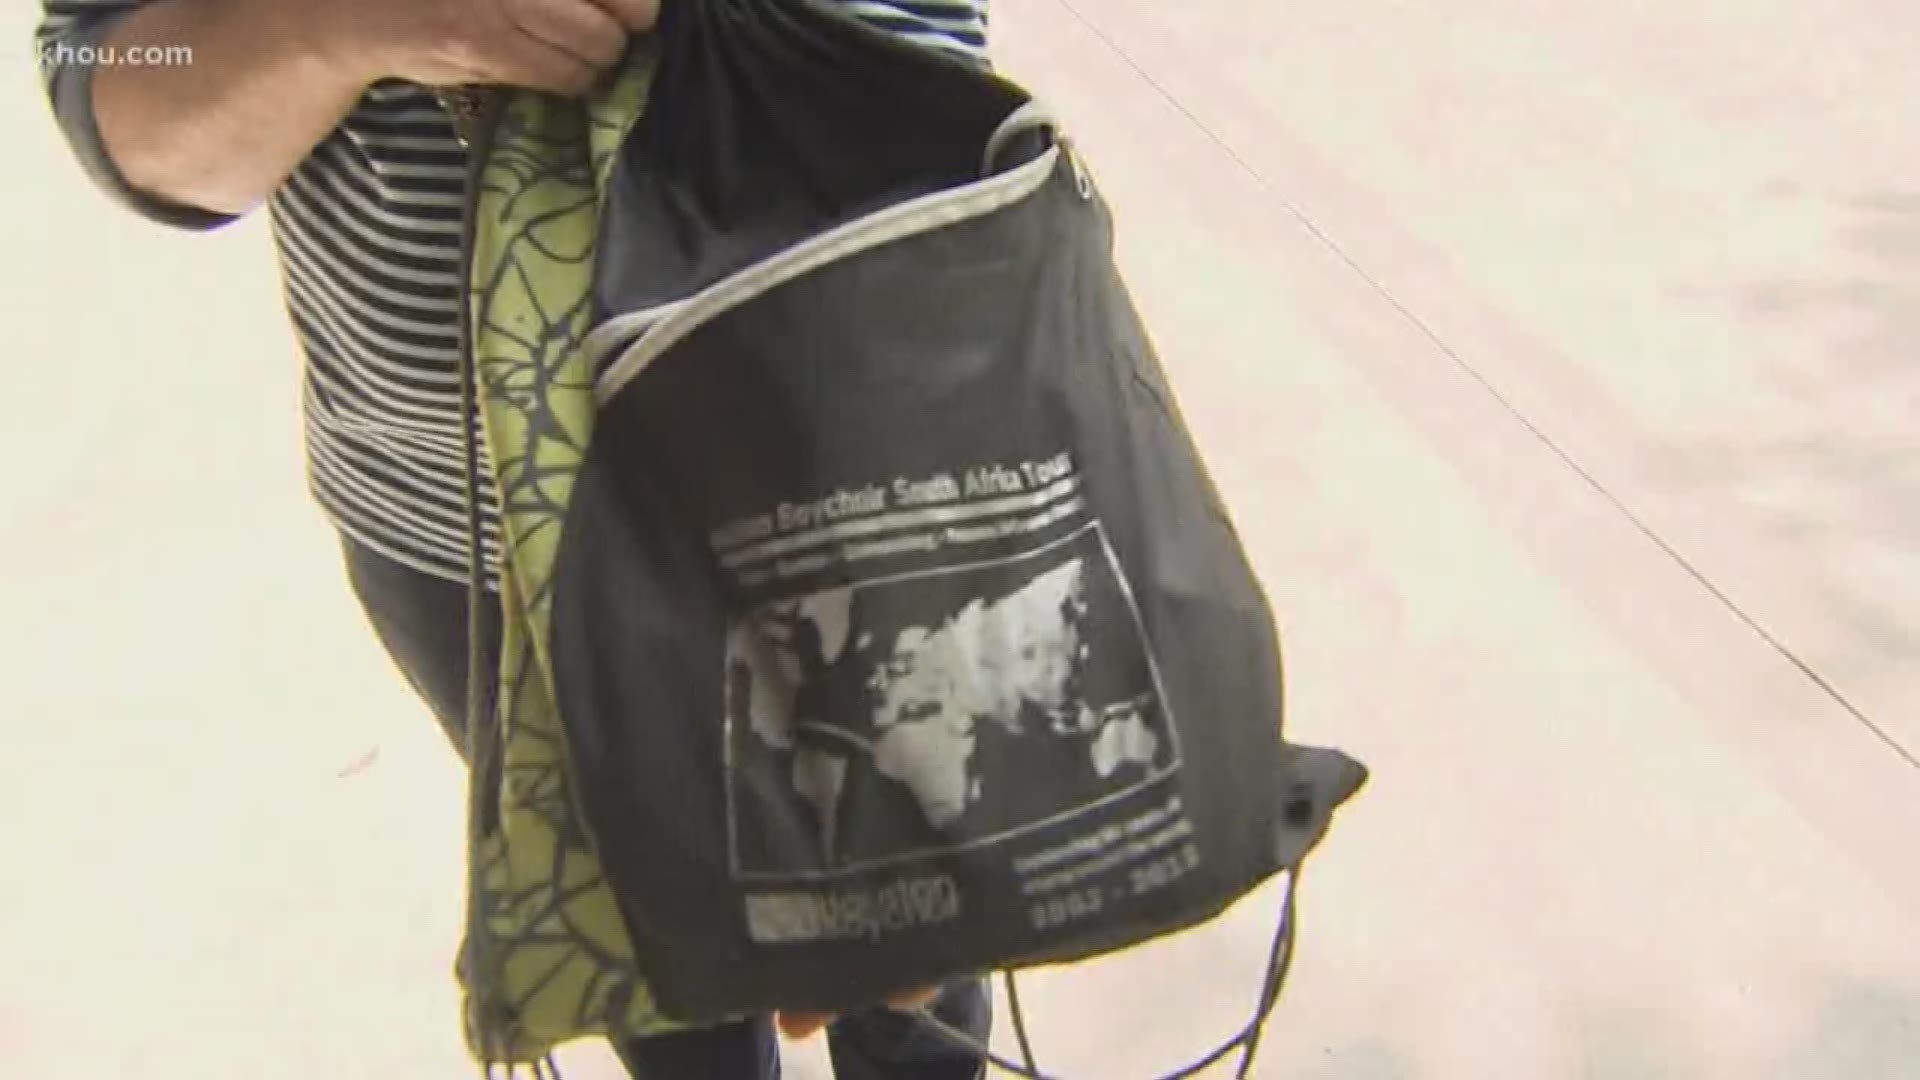 Backpacks are no longer allowed at Minute Maid, a new policy that went into effect Monday.